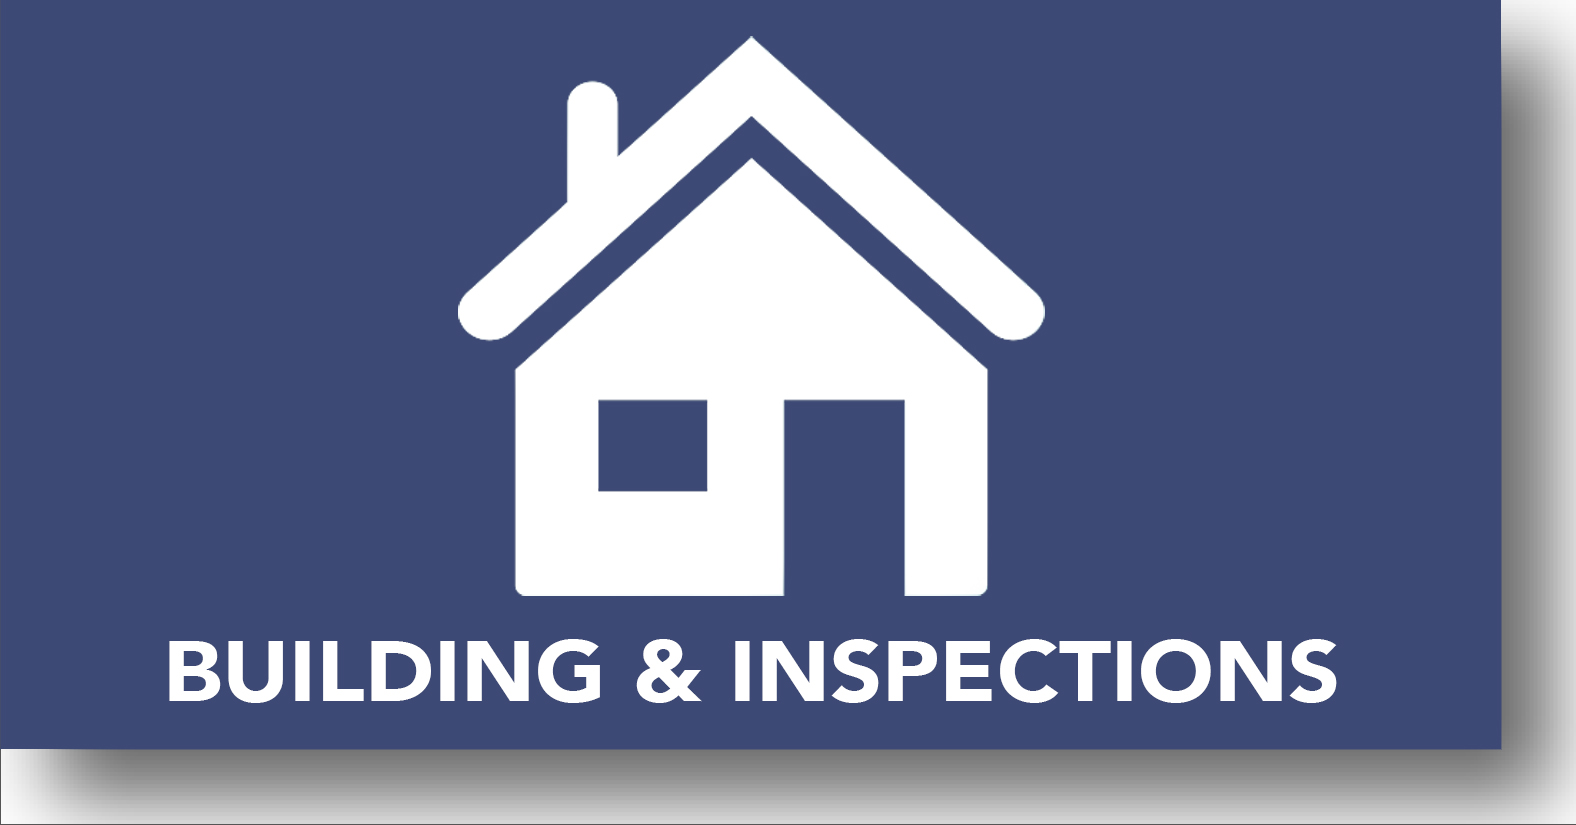 Building & Inspections